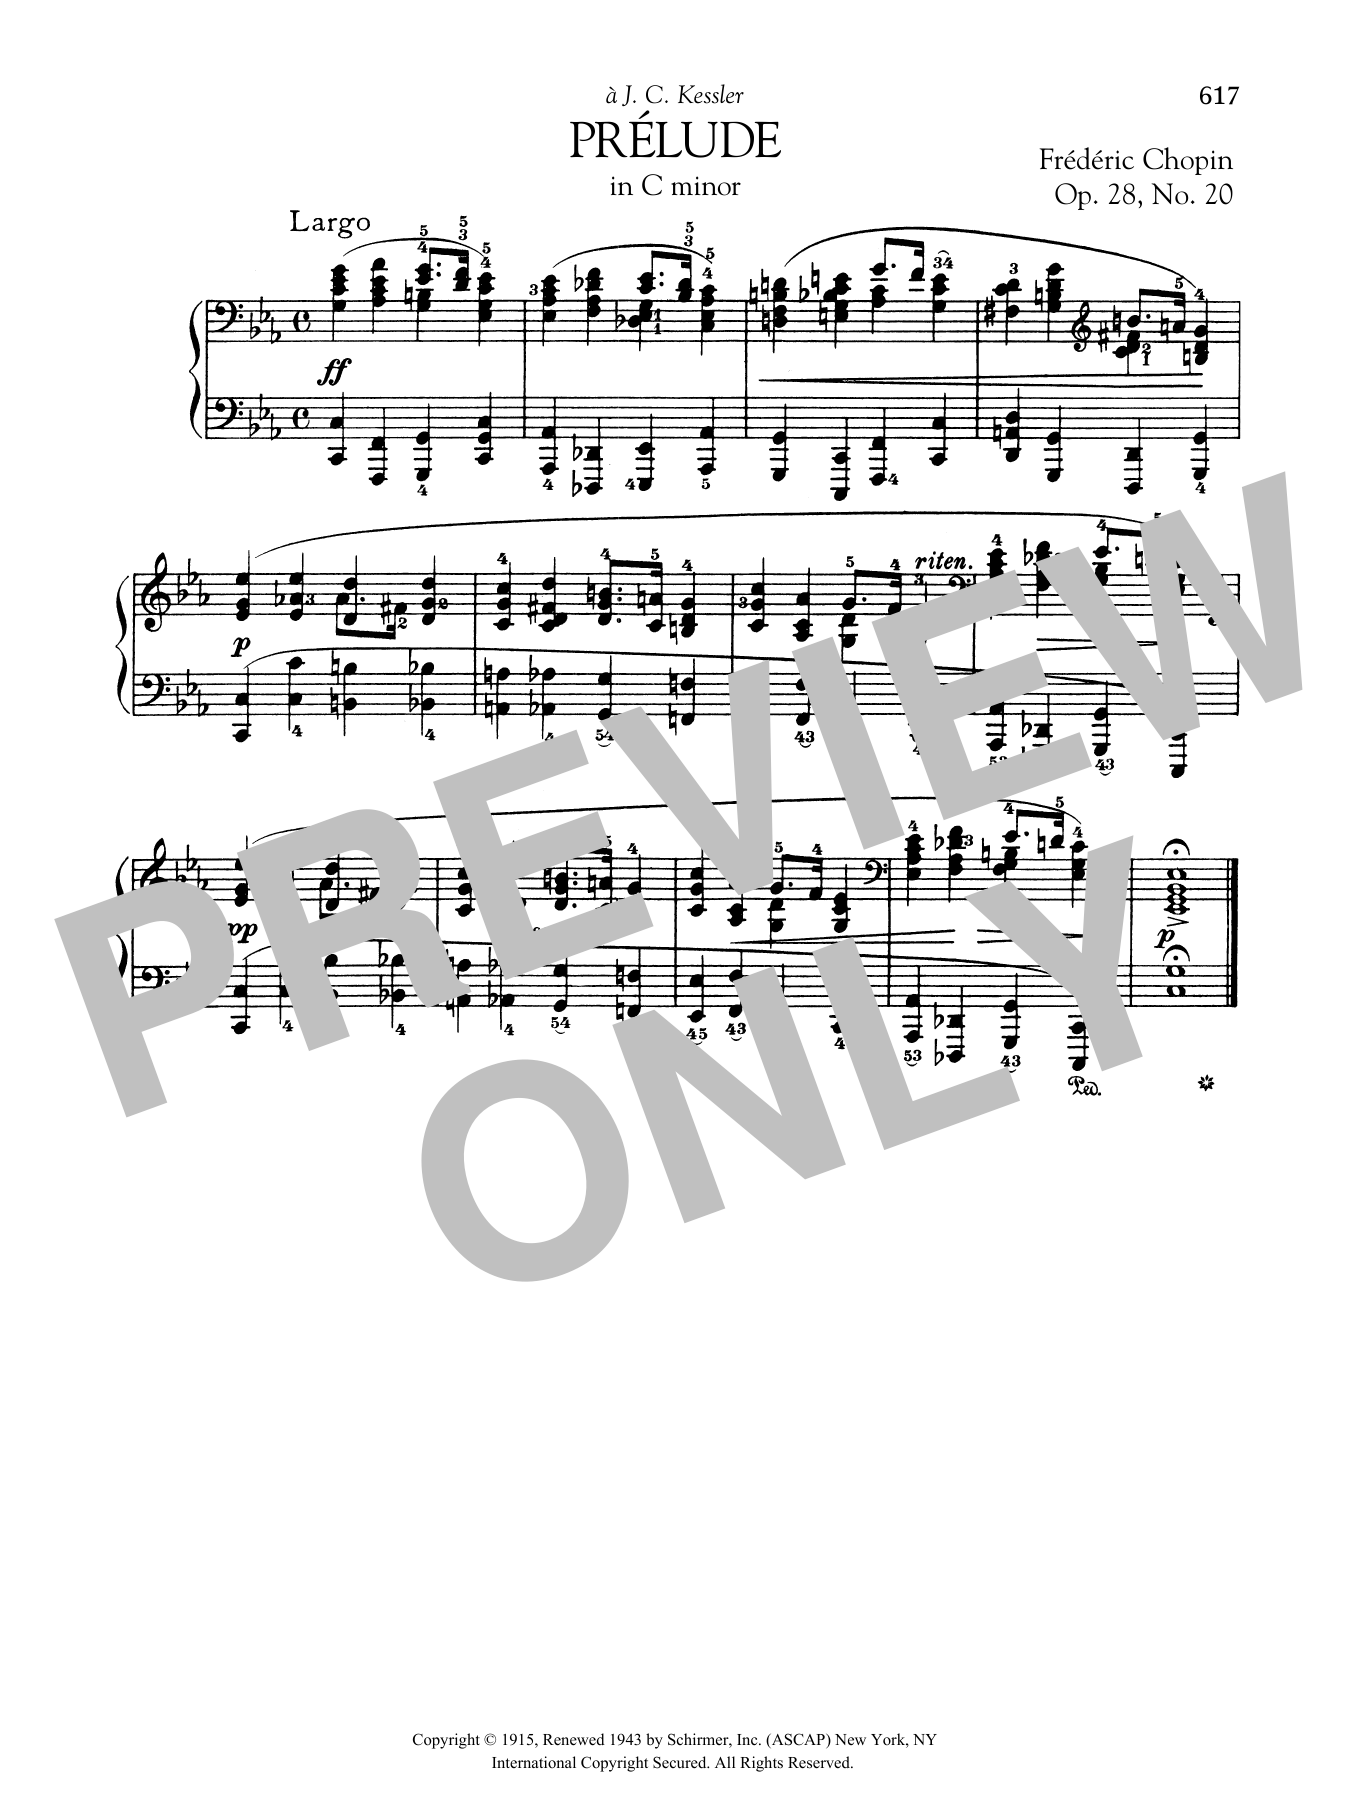 Download Frédéric Chopin Prelude In C Minor, Op. 28, No. 20 Sheet Music